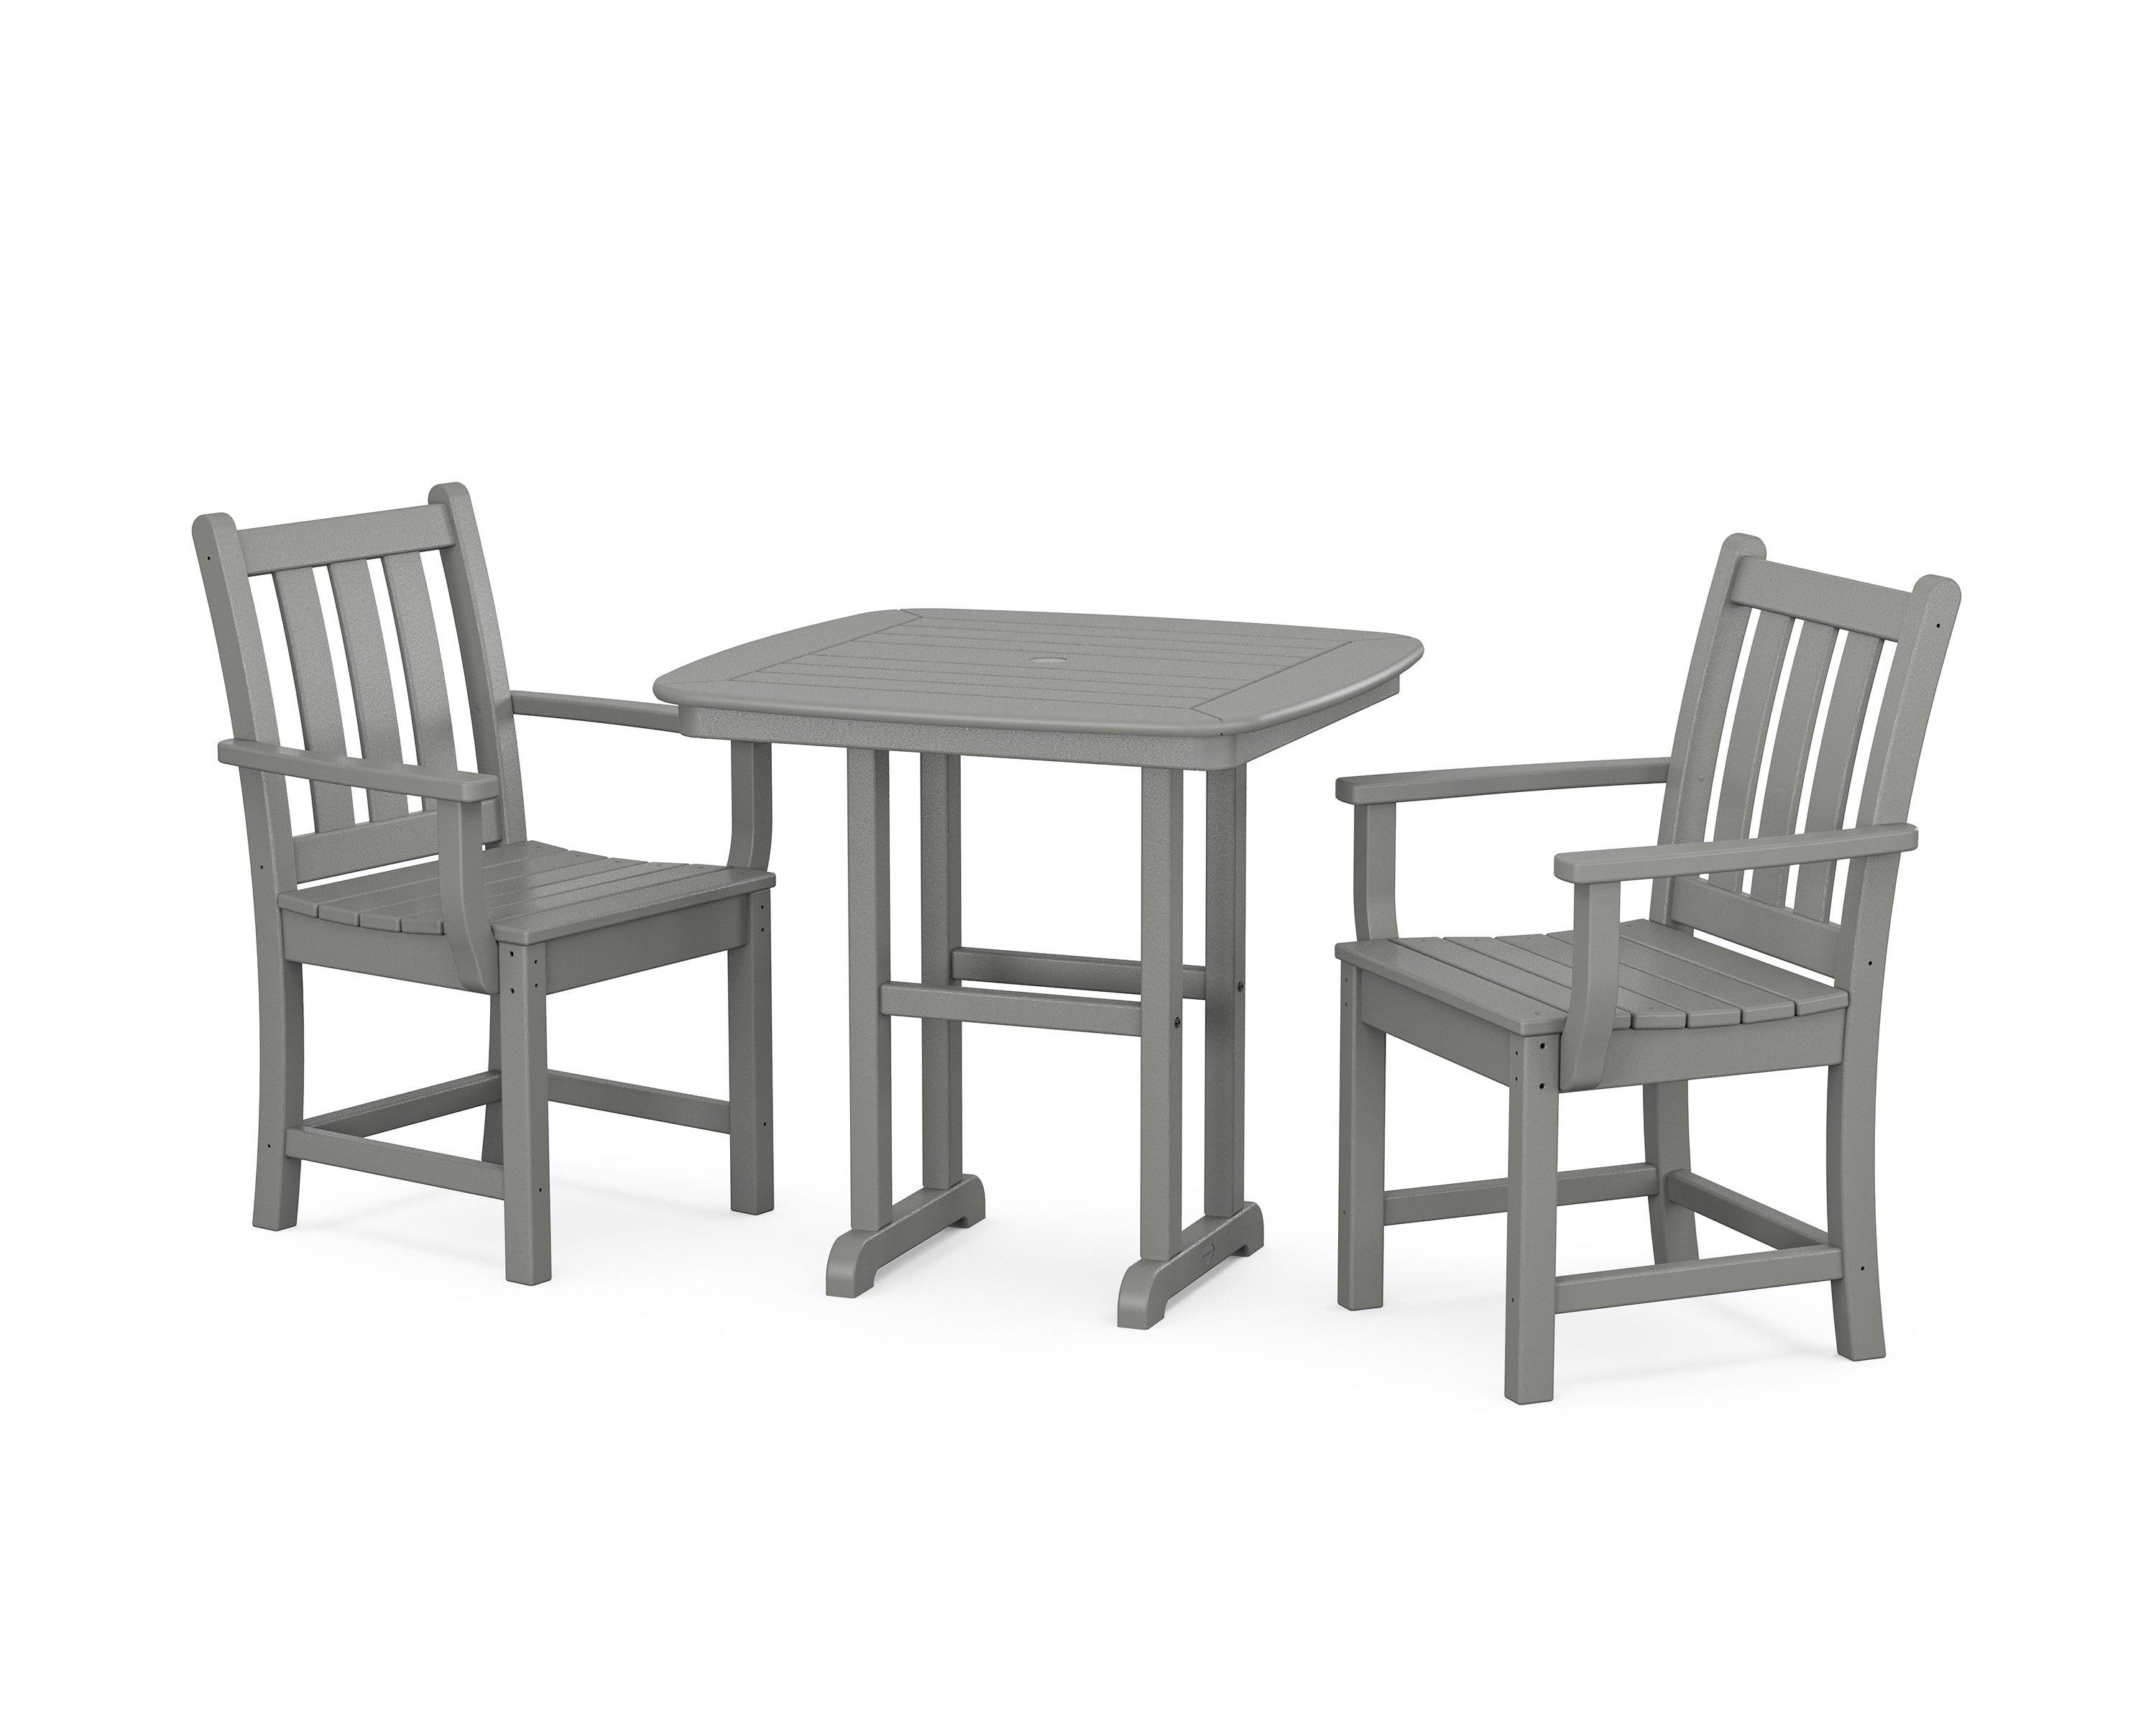 POLYWOOD® Traditional Garden 3-Piece Dining Set in Slate Grey